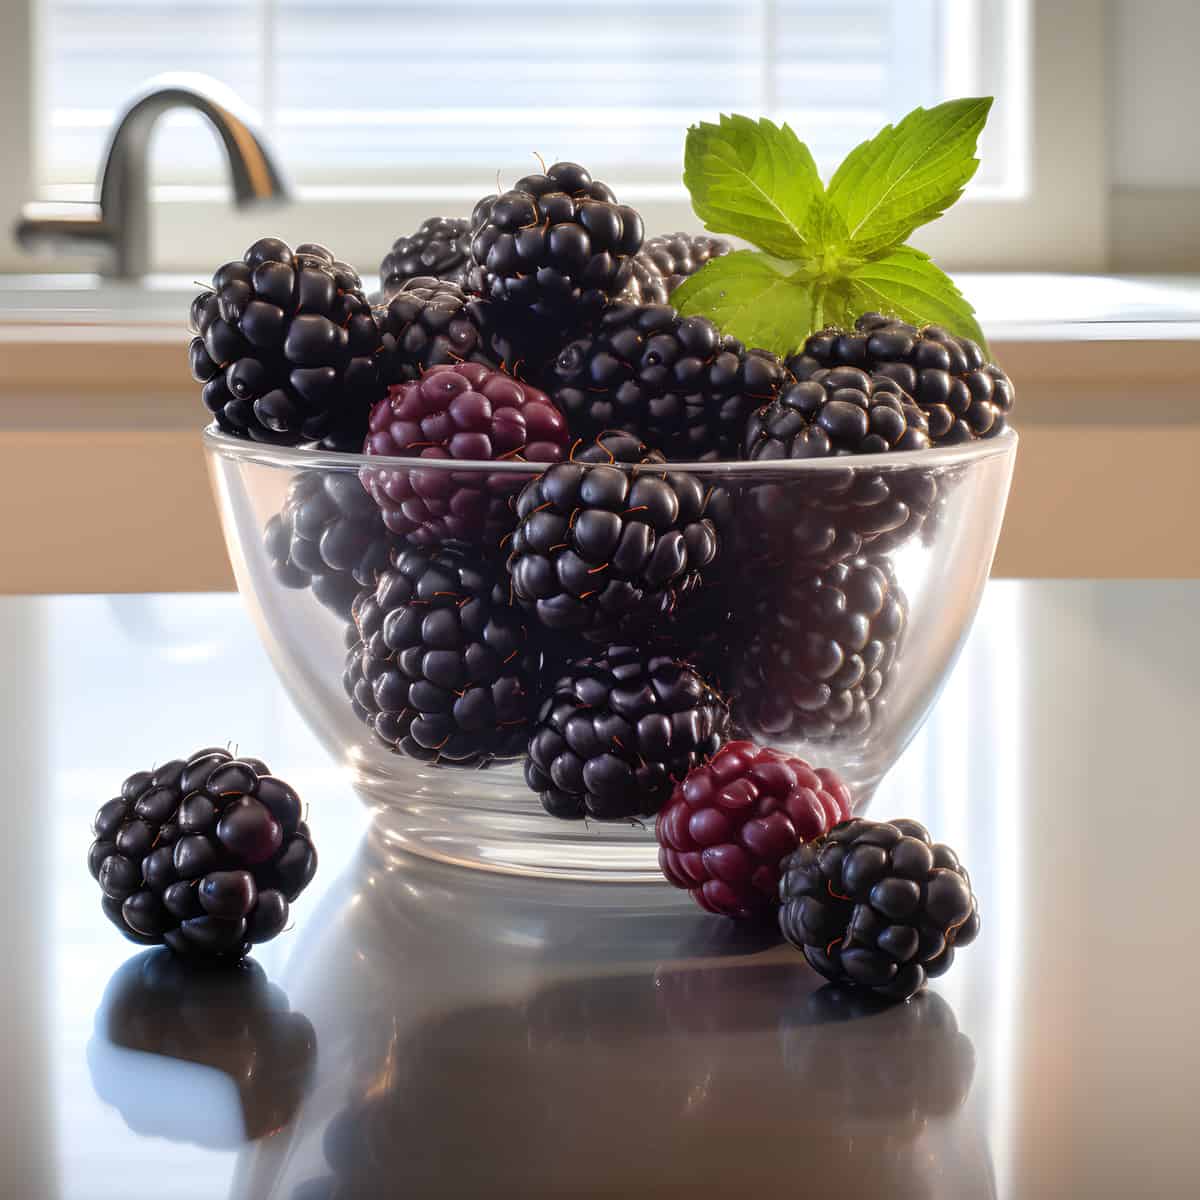 Smooth Blackberry on a kitchen counter